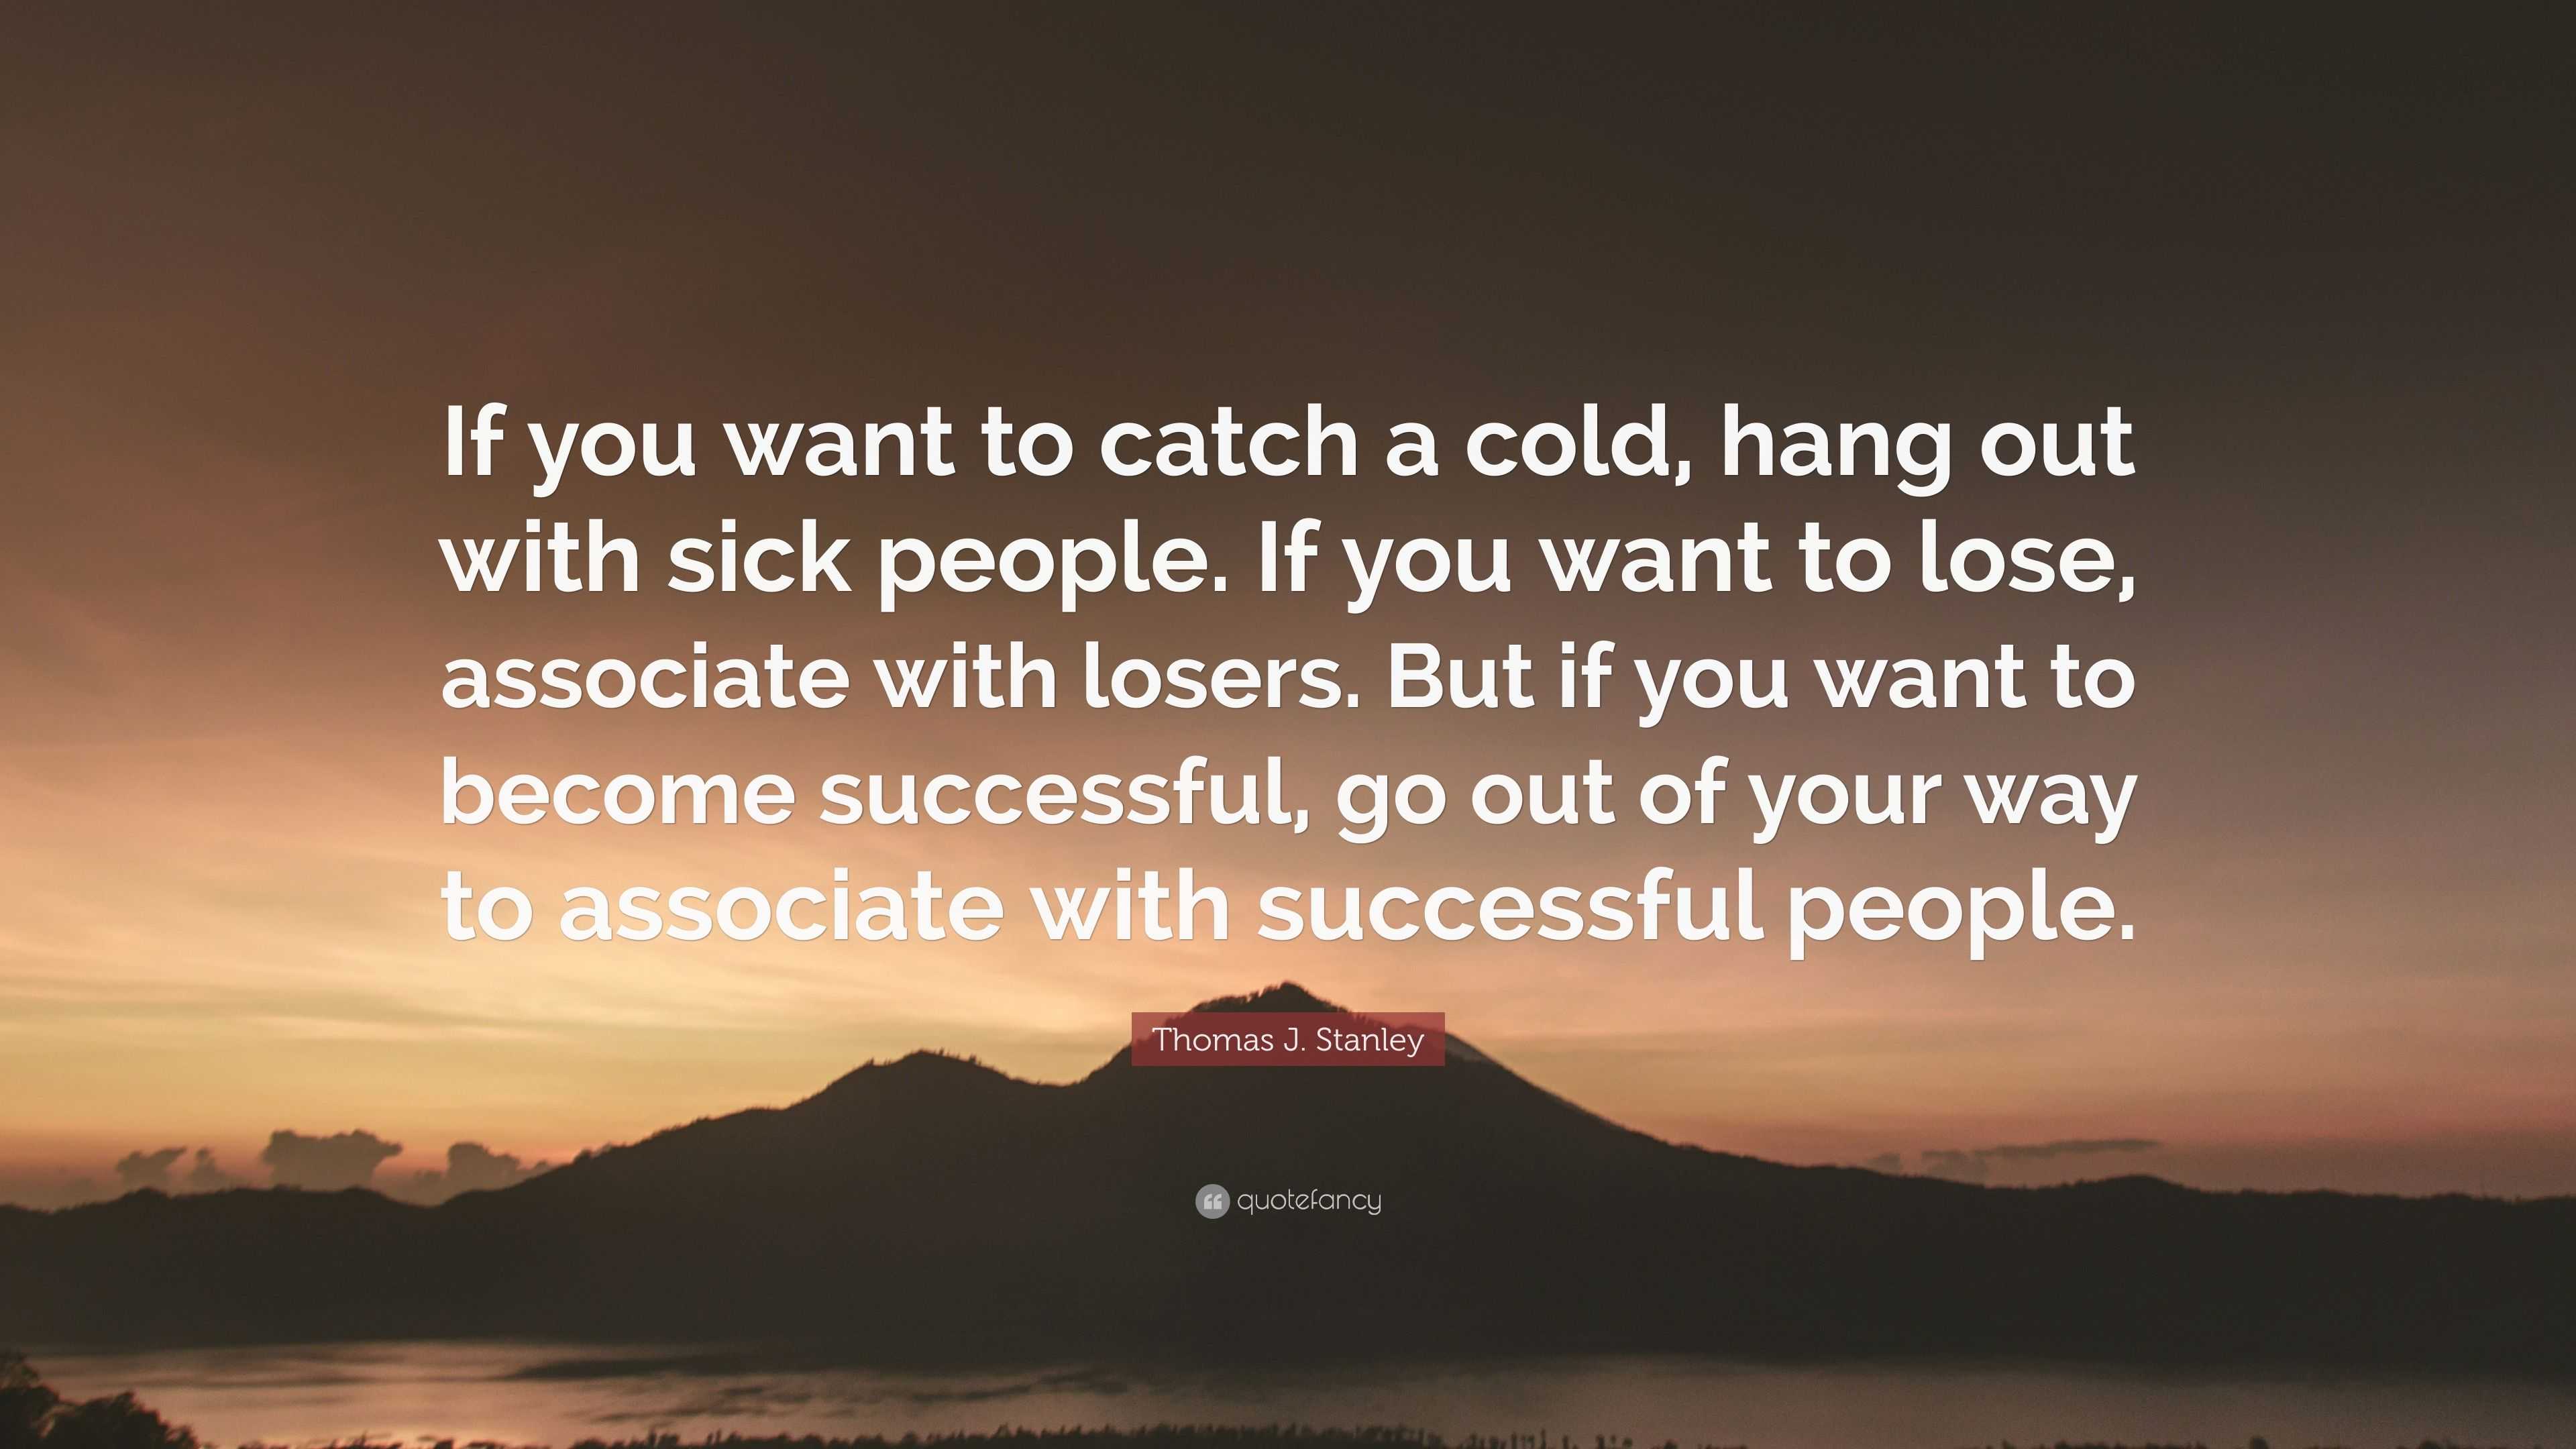 Thomas J. Stanley Quote: “If you want to catch a cold, hang out with sick  people. If you want to lose, associate with losers. But if you want to  b...” (7 wallpapers) -